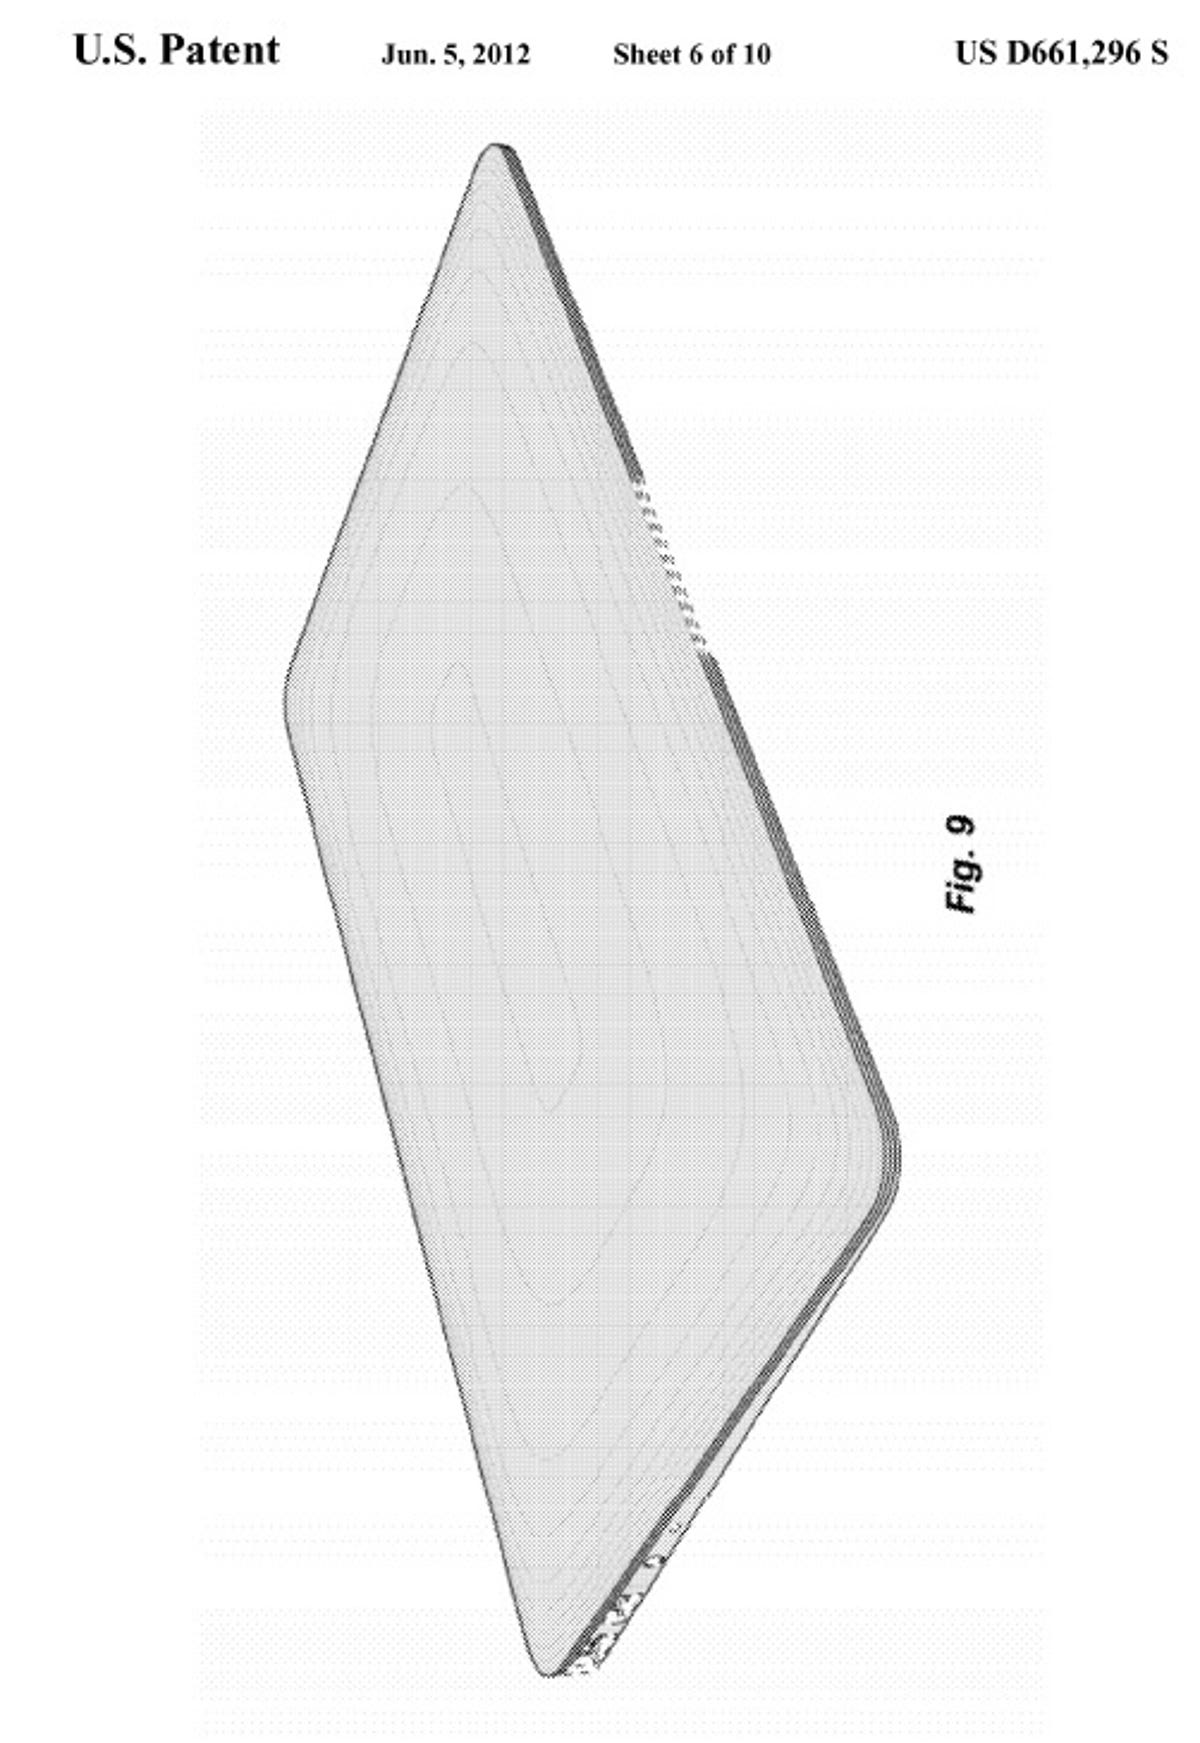 Apple's wedge aesthetic: patent No. D661,296 S.